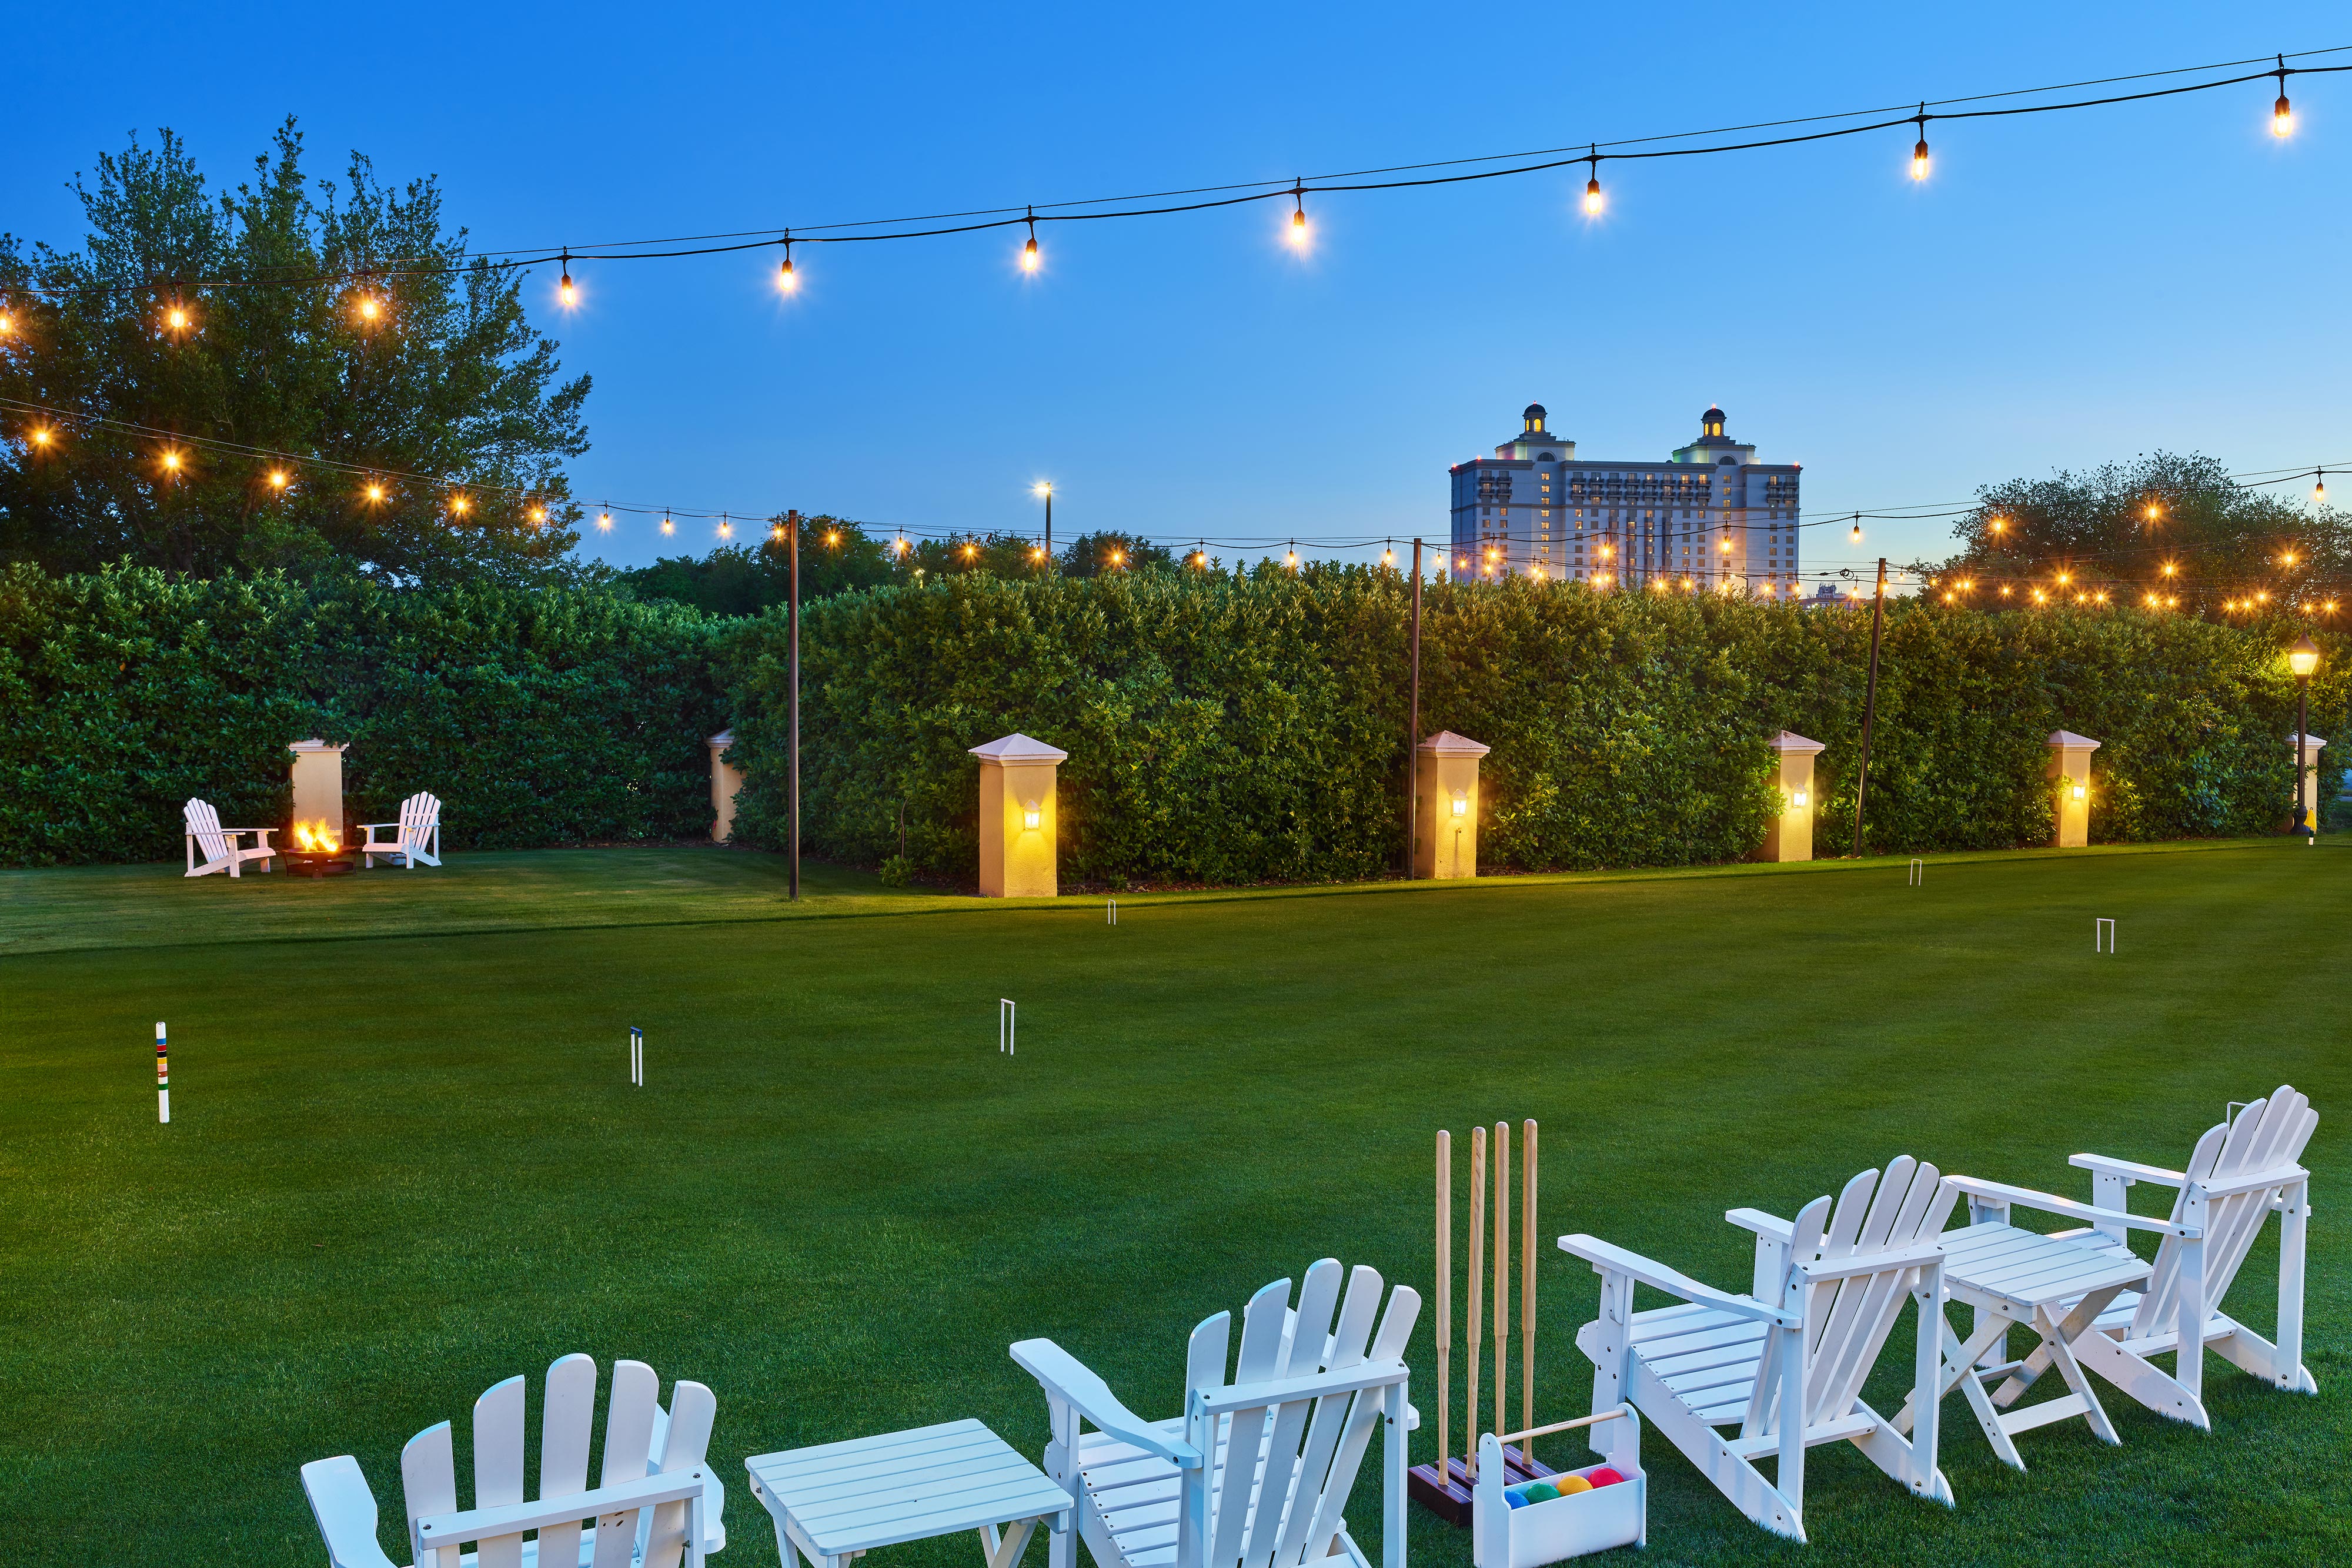 Manicured course with a croquet set and lawn chairs, lit with overhead string lights